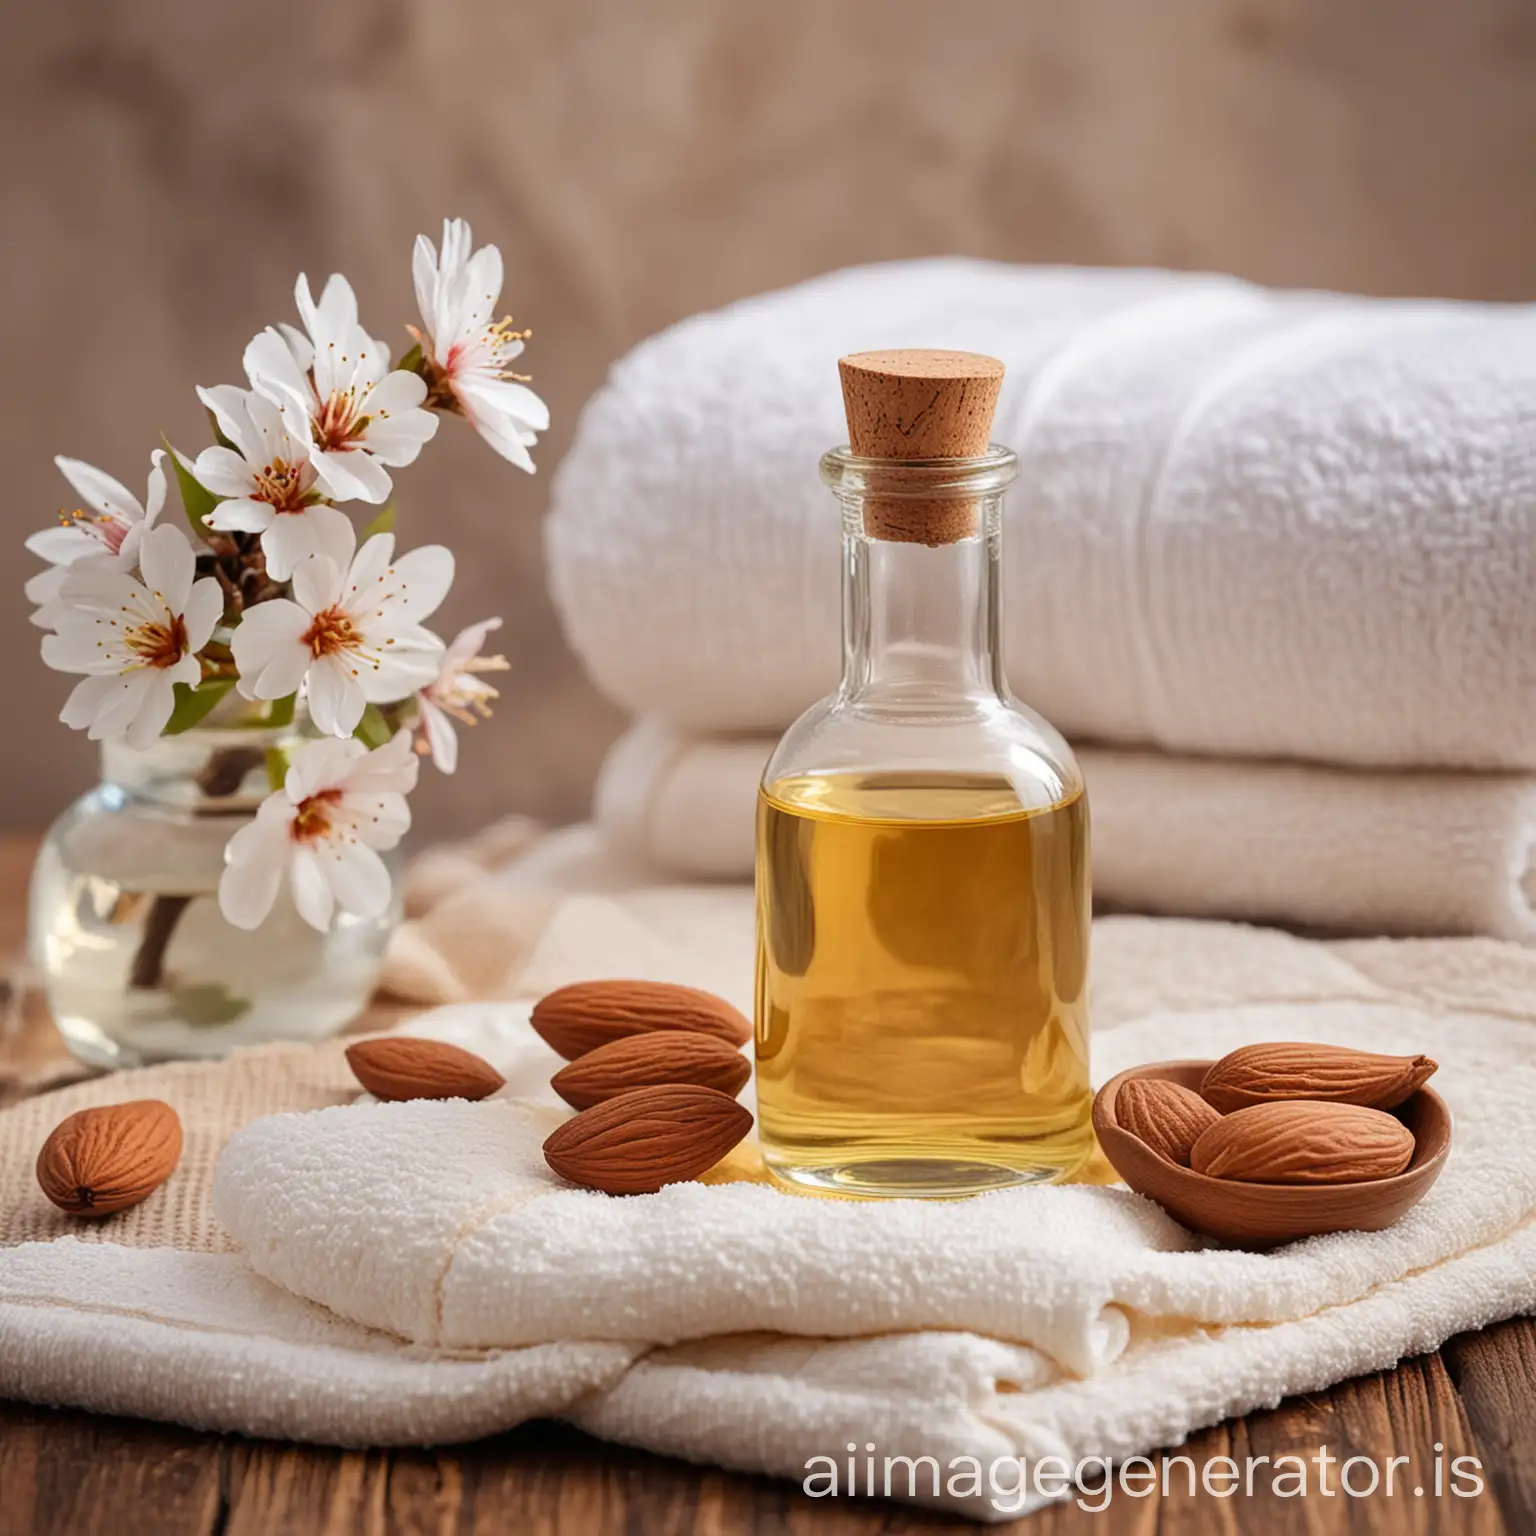 Almond-Oil-Massage-in-a-Spa-Setting-with-Towels-and-Blossoms